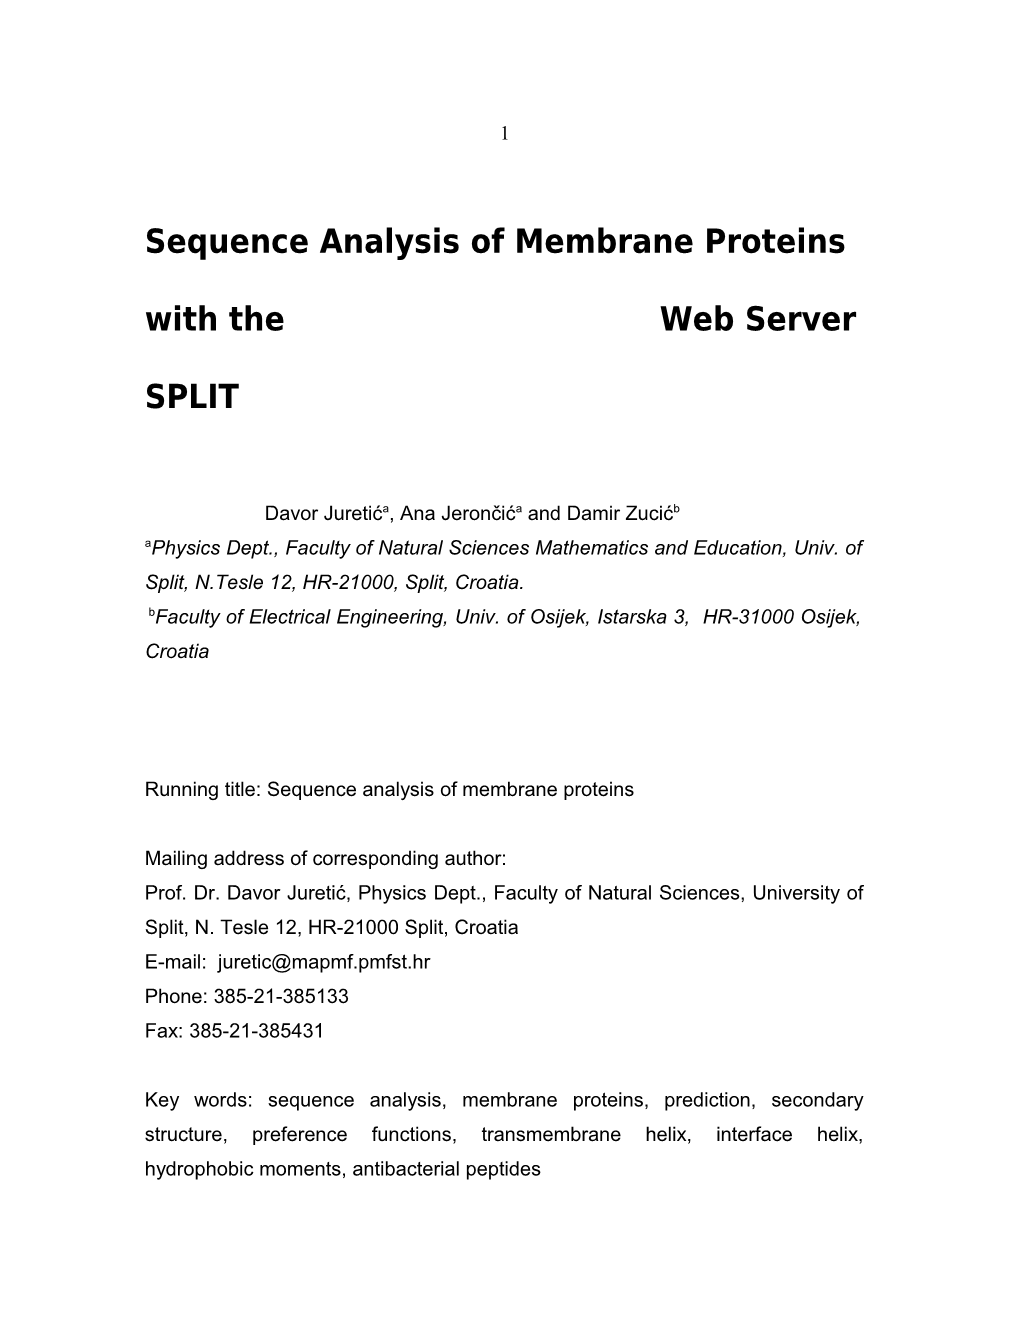 Sequence Analysis of Membrane Proteins with the Web